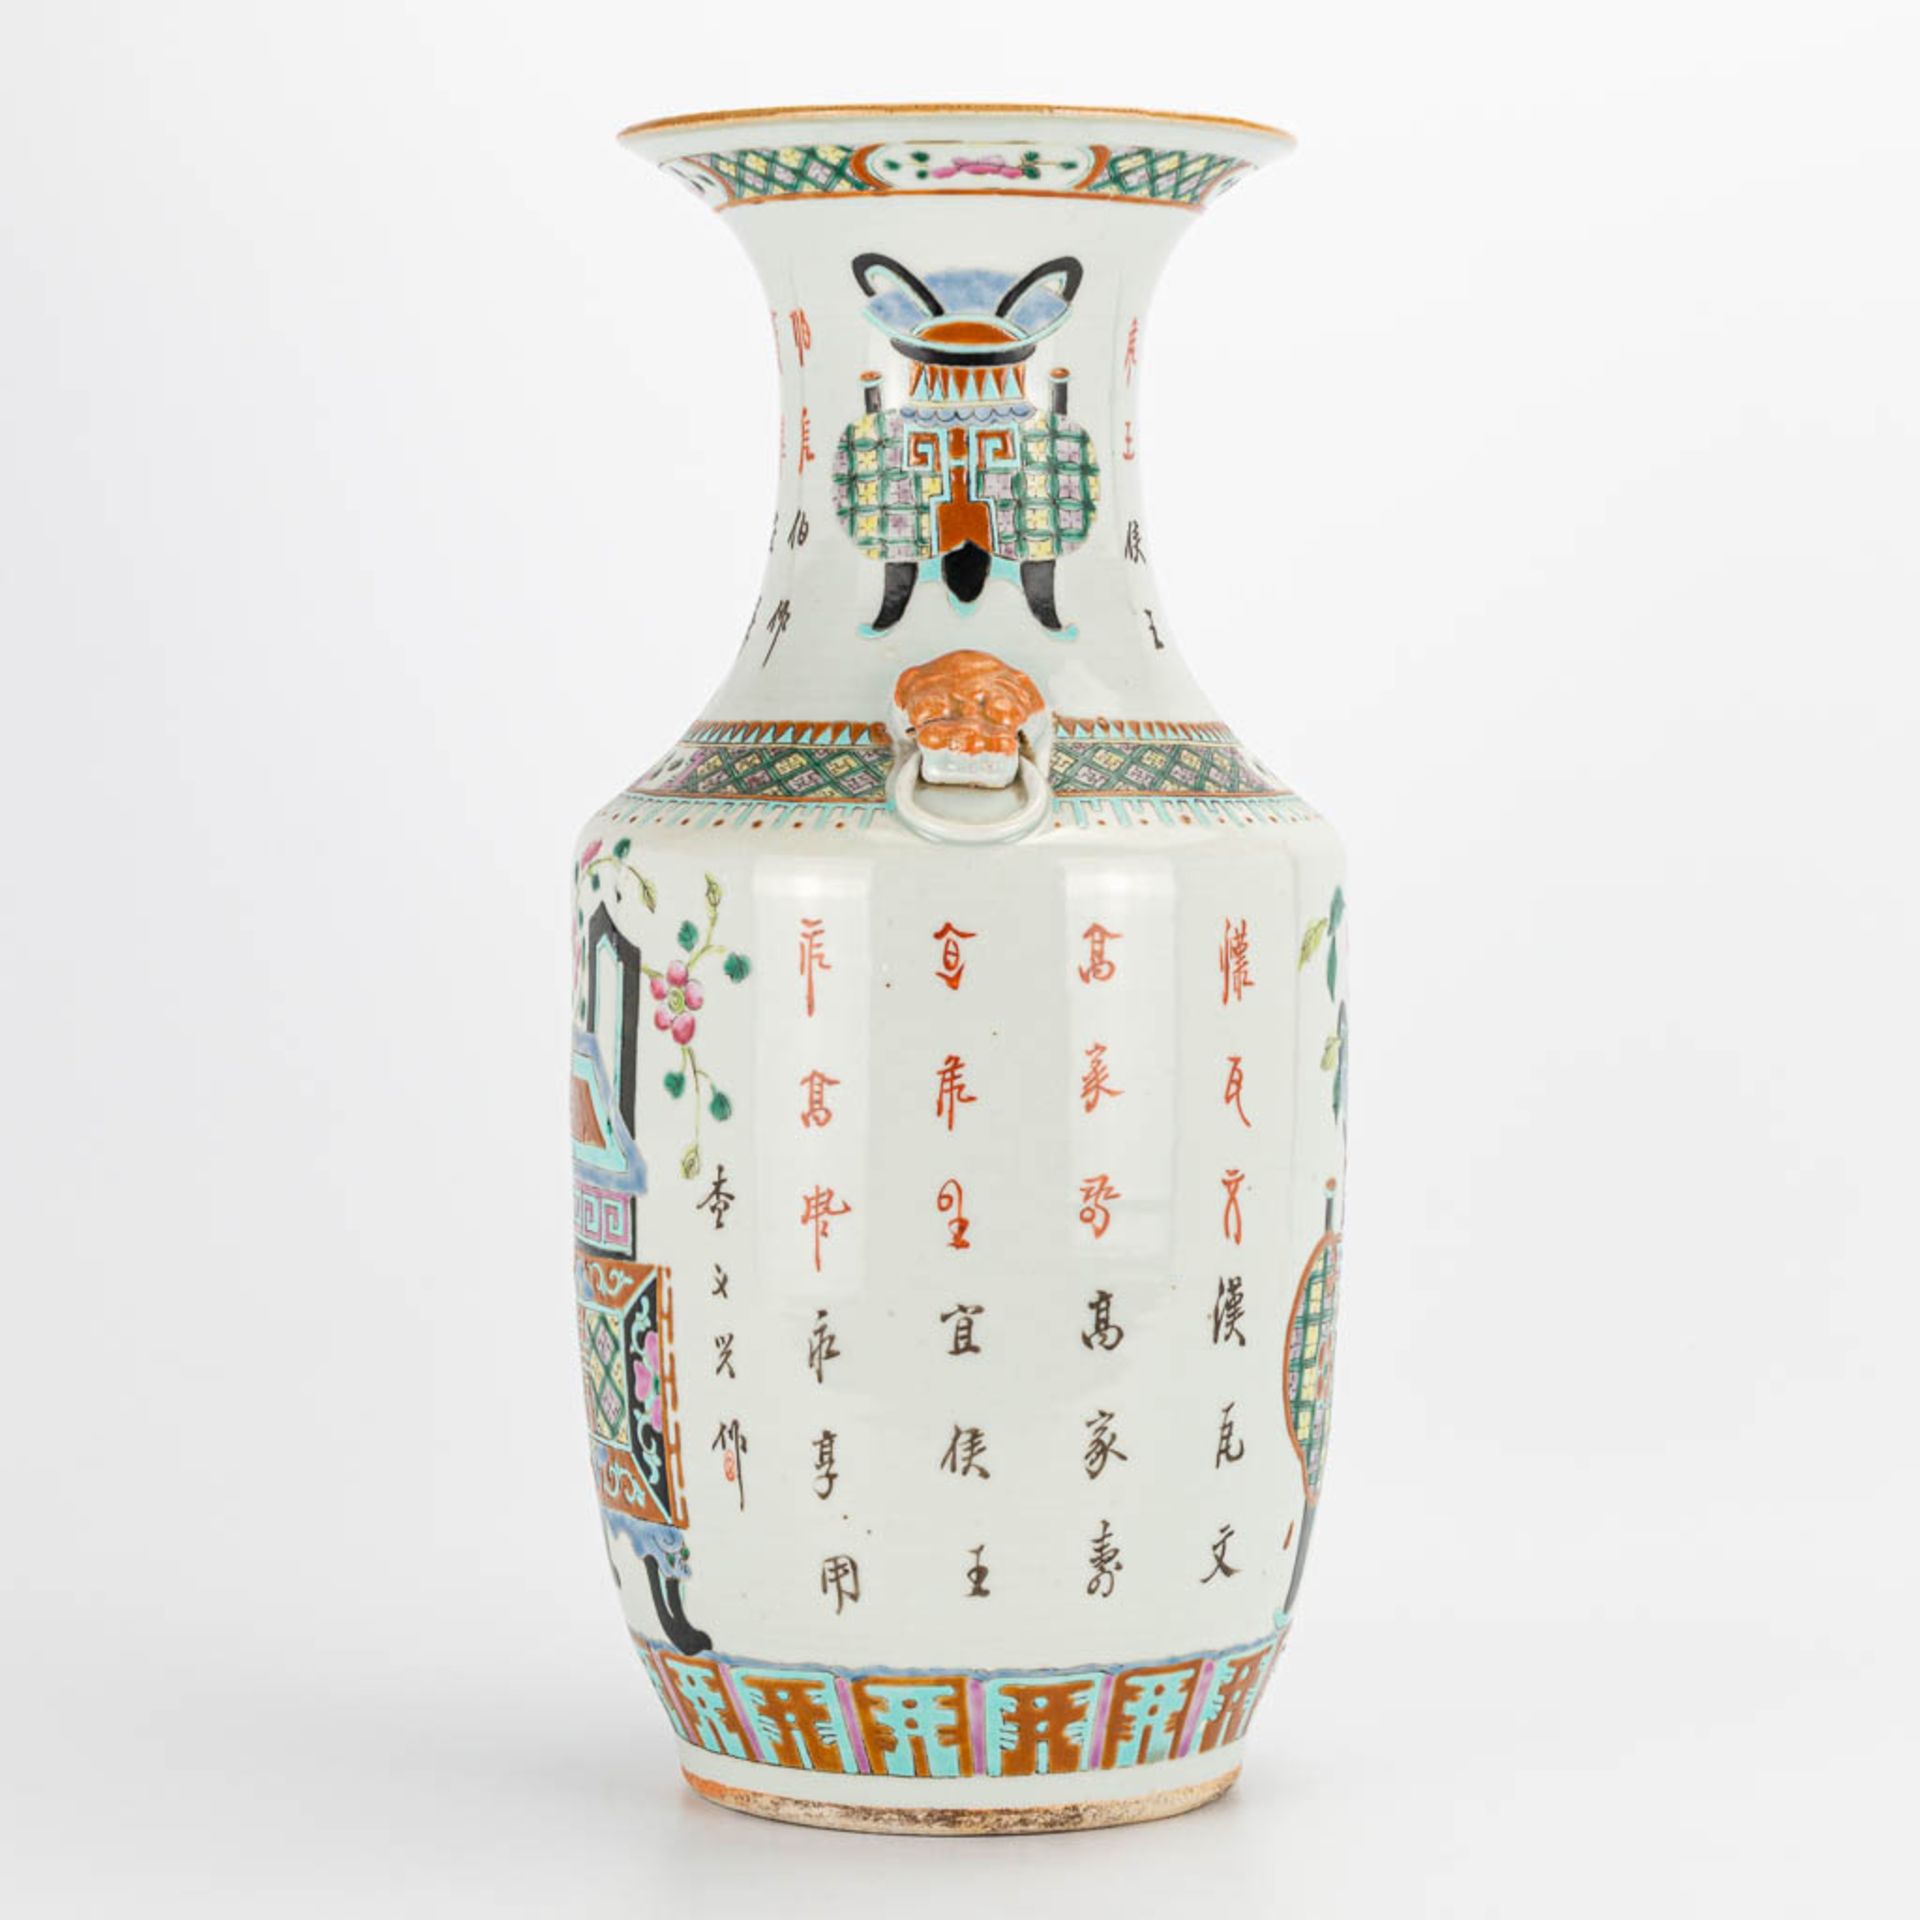 A chinese vase with decor of a planter. 19th/20th century. (43 x 20 cm) - Image 6 of 23